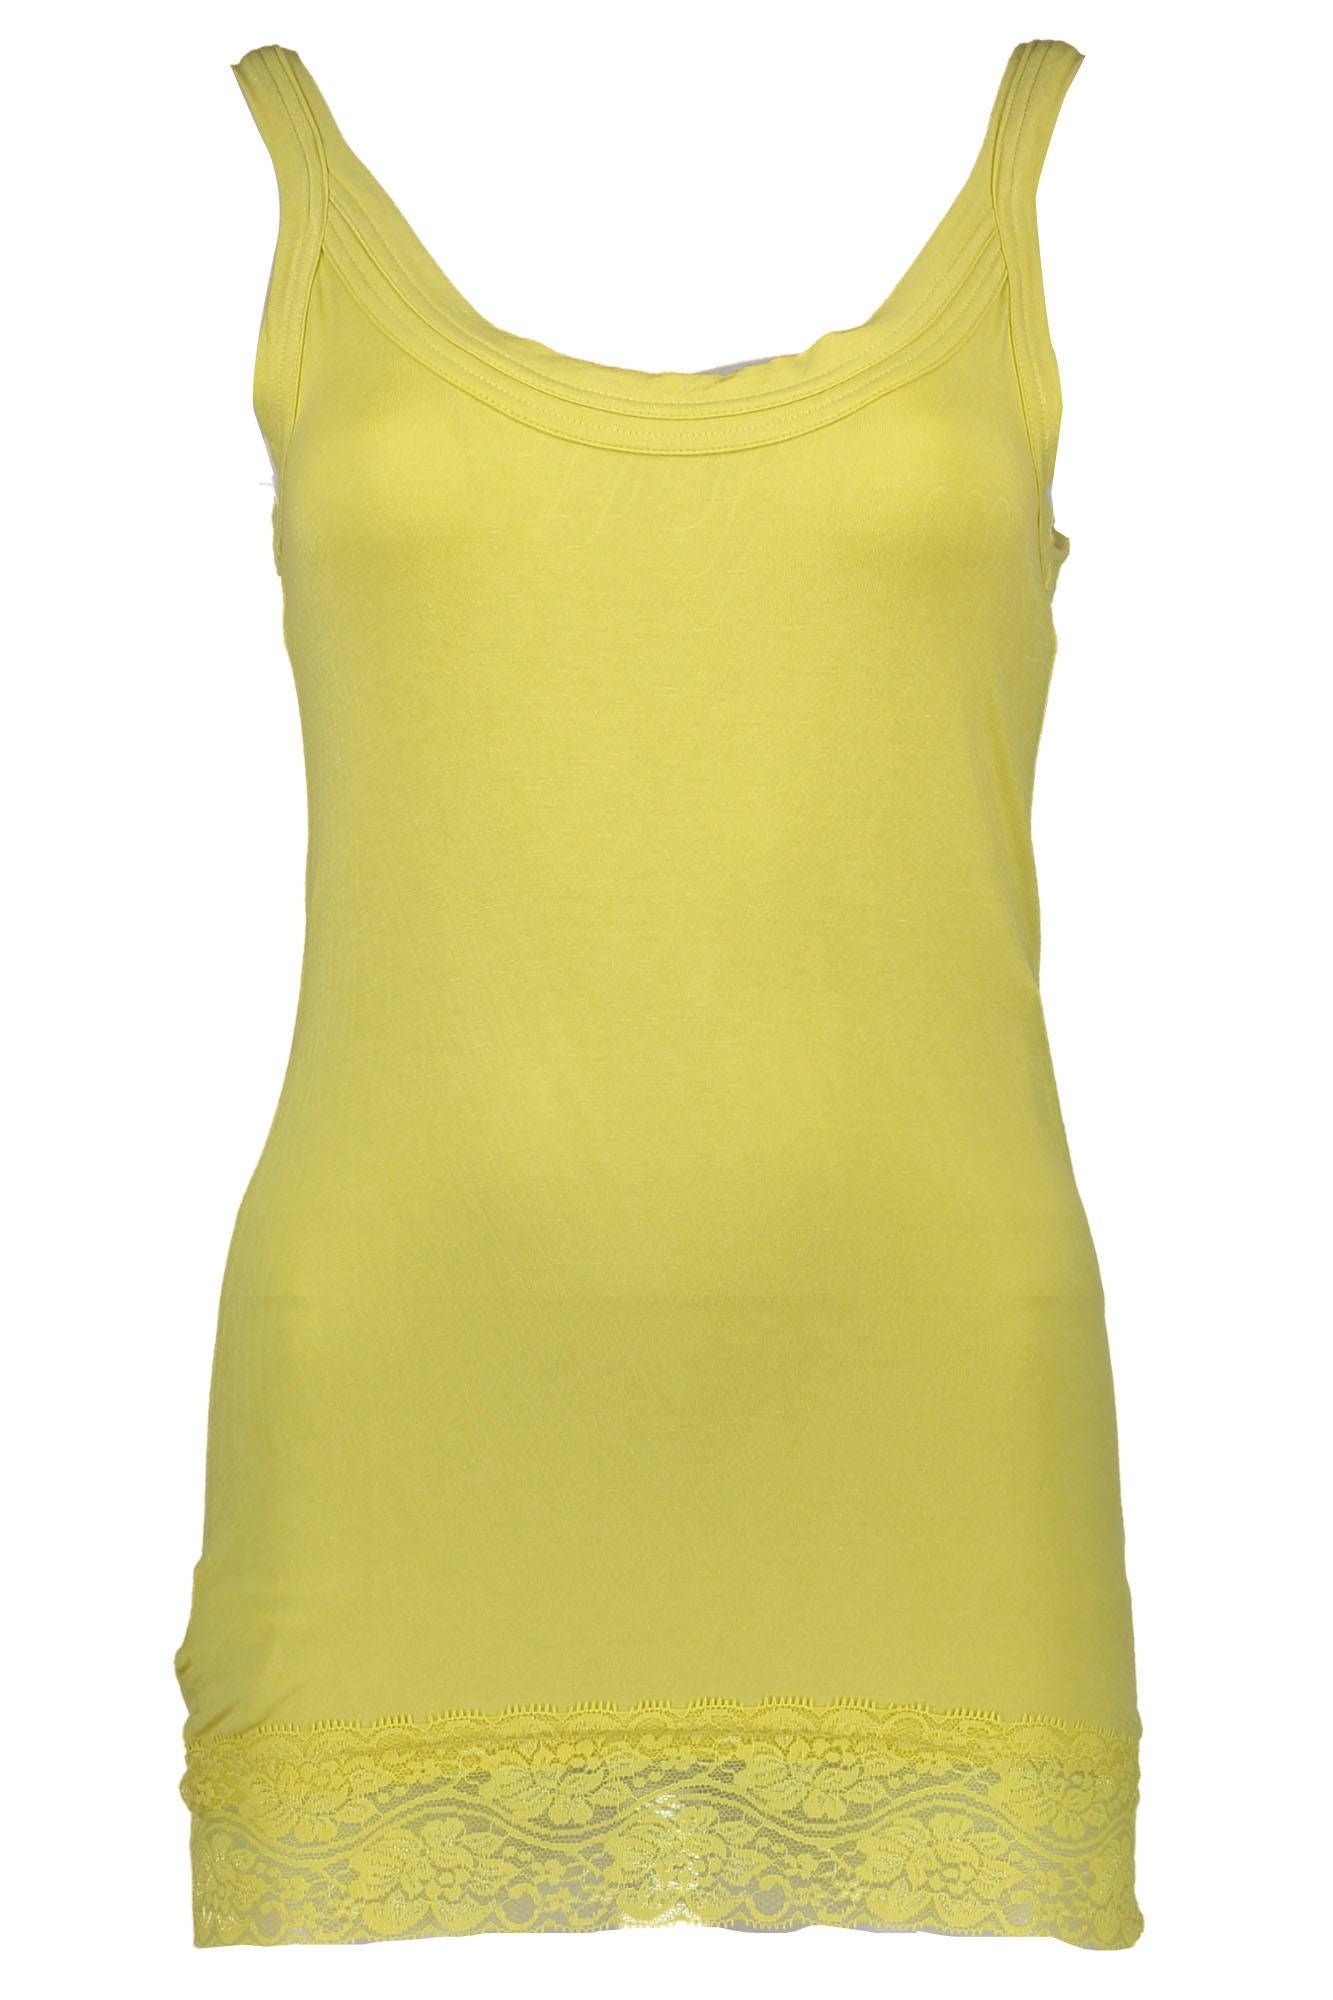 Chic Yellow Lace-Insert Tank Top